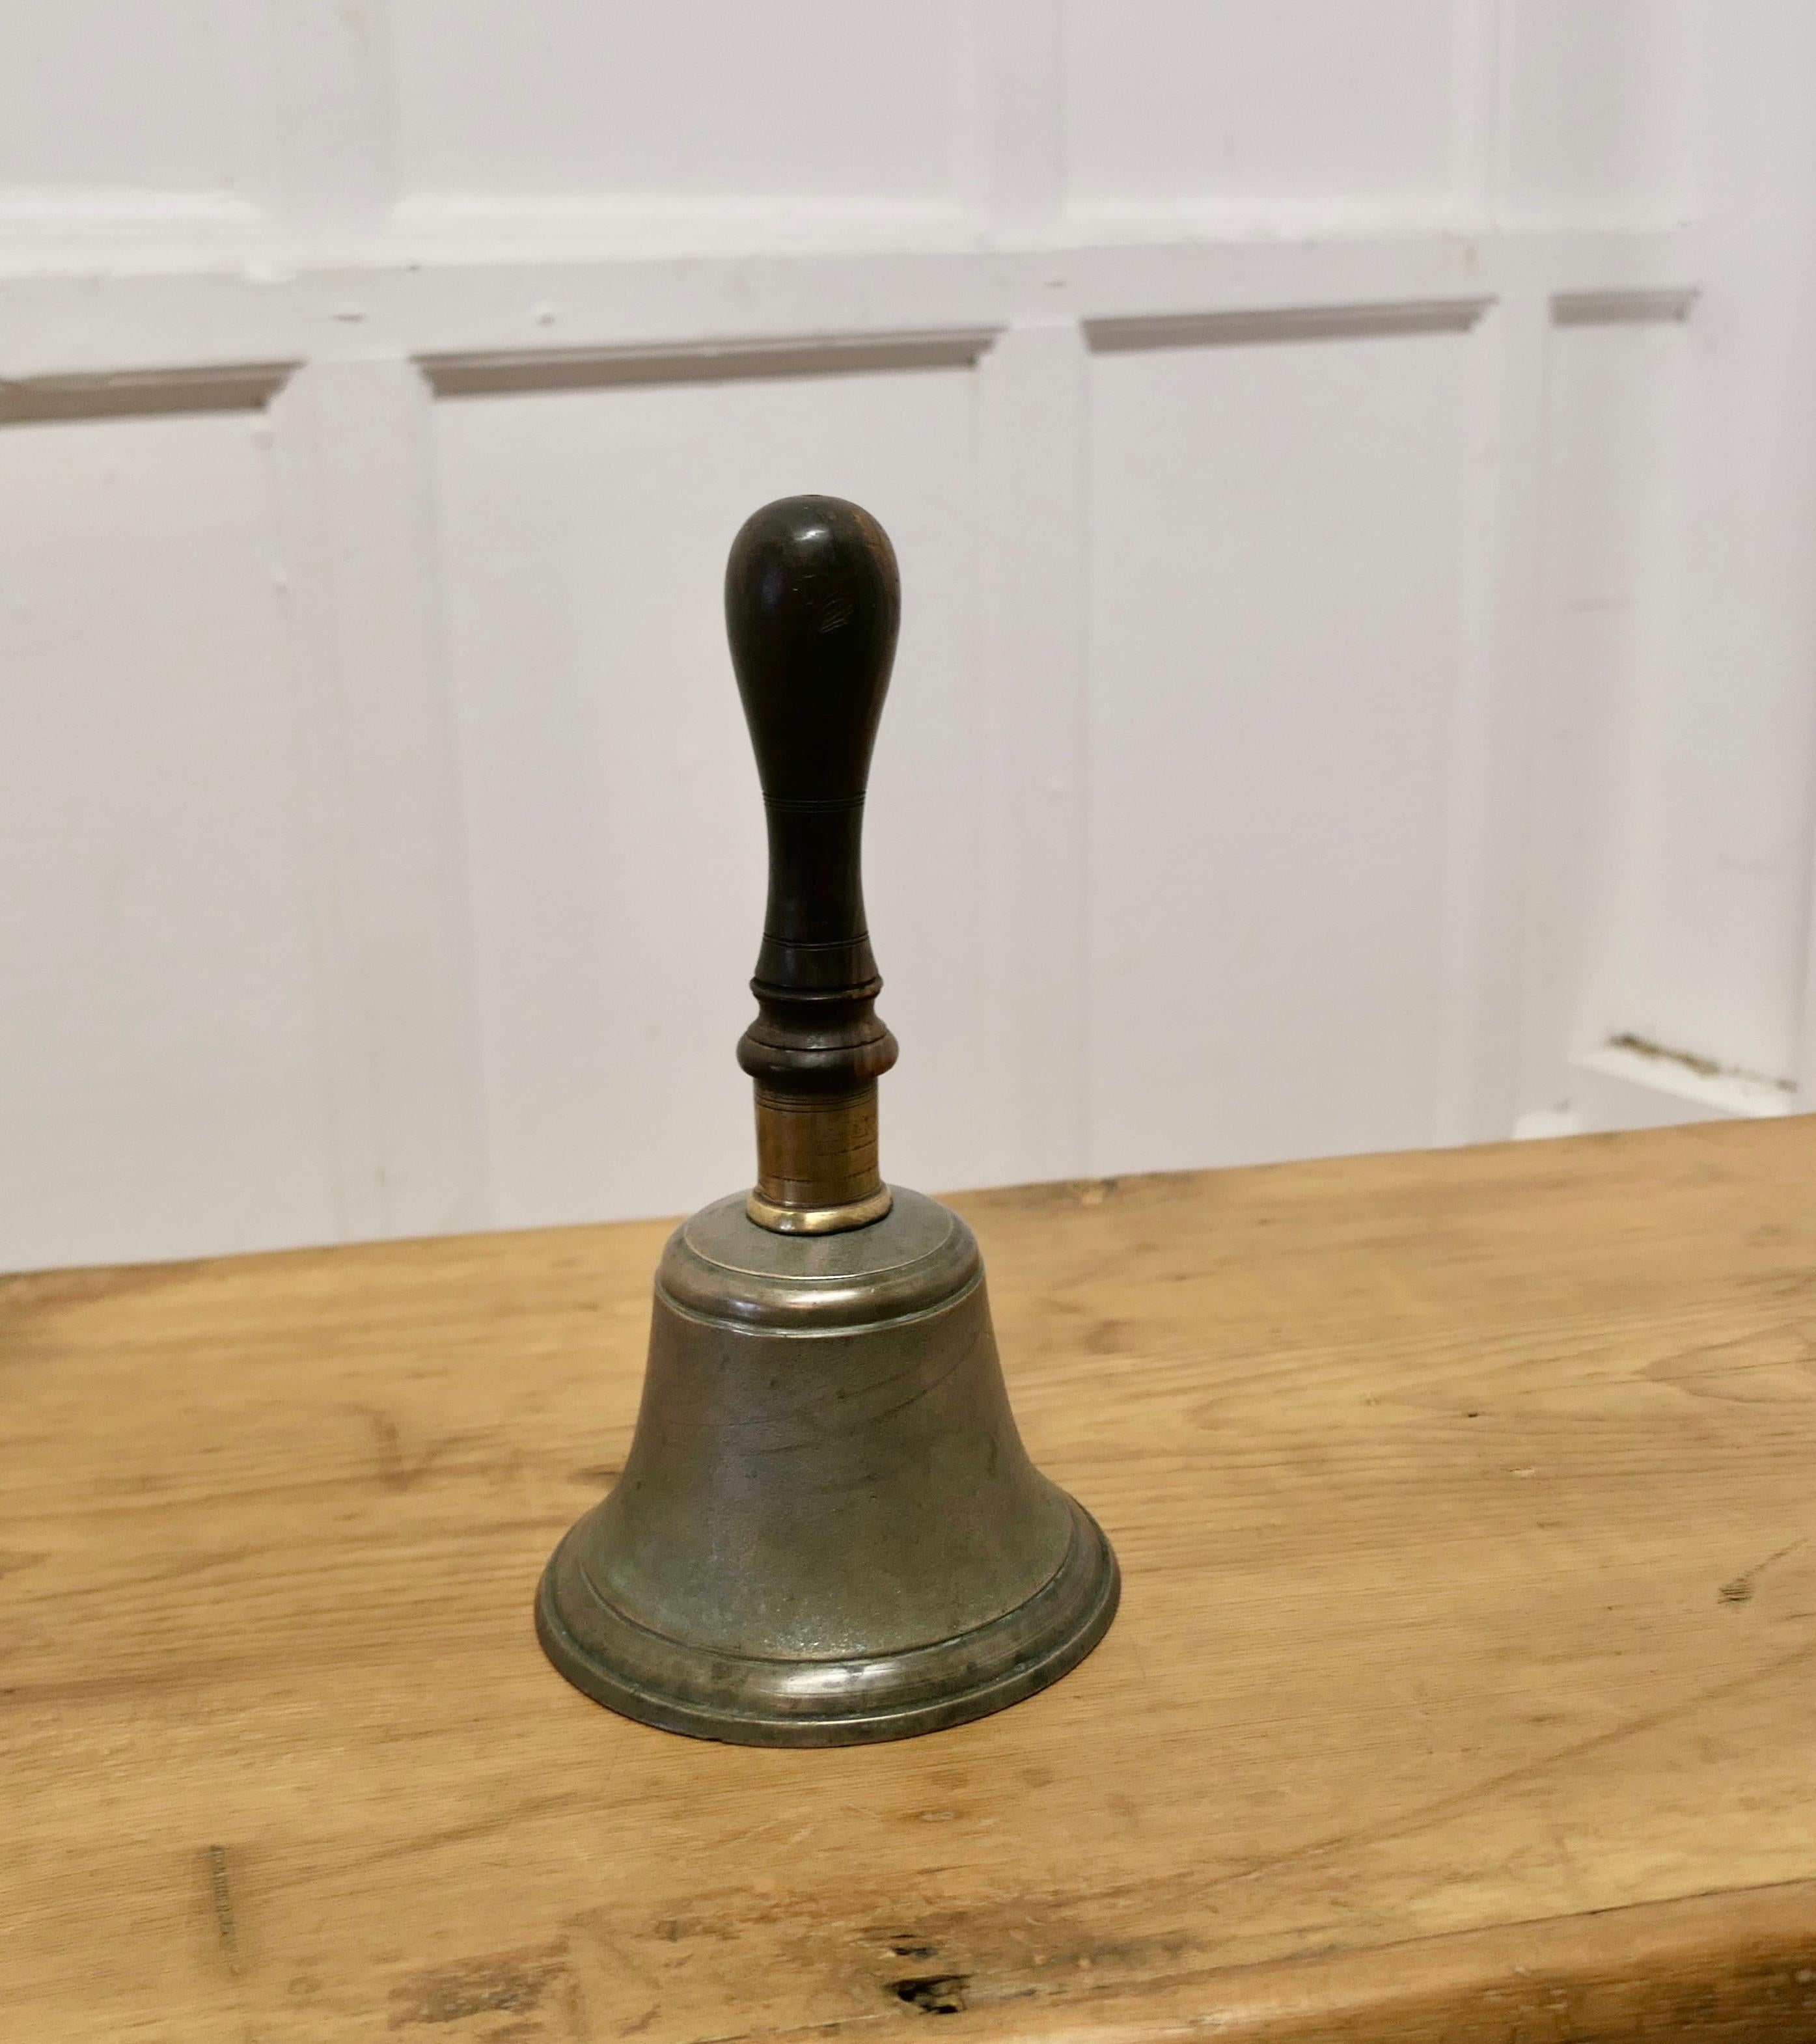 Old Bronze Hand Bell, Town Cryer’s or School Bell

A Great piece, the bell is made in solid bronze and has a beautiful lignum vitae turned handle and a loud ring 
The bell is 12” high, and 6” in diameter
VY40
